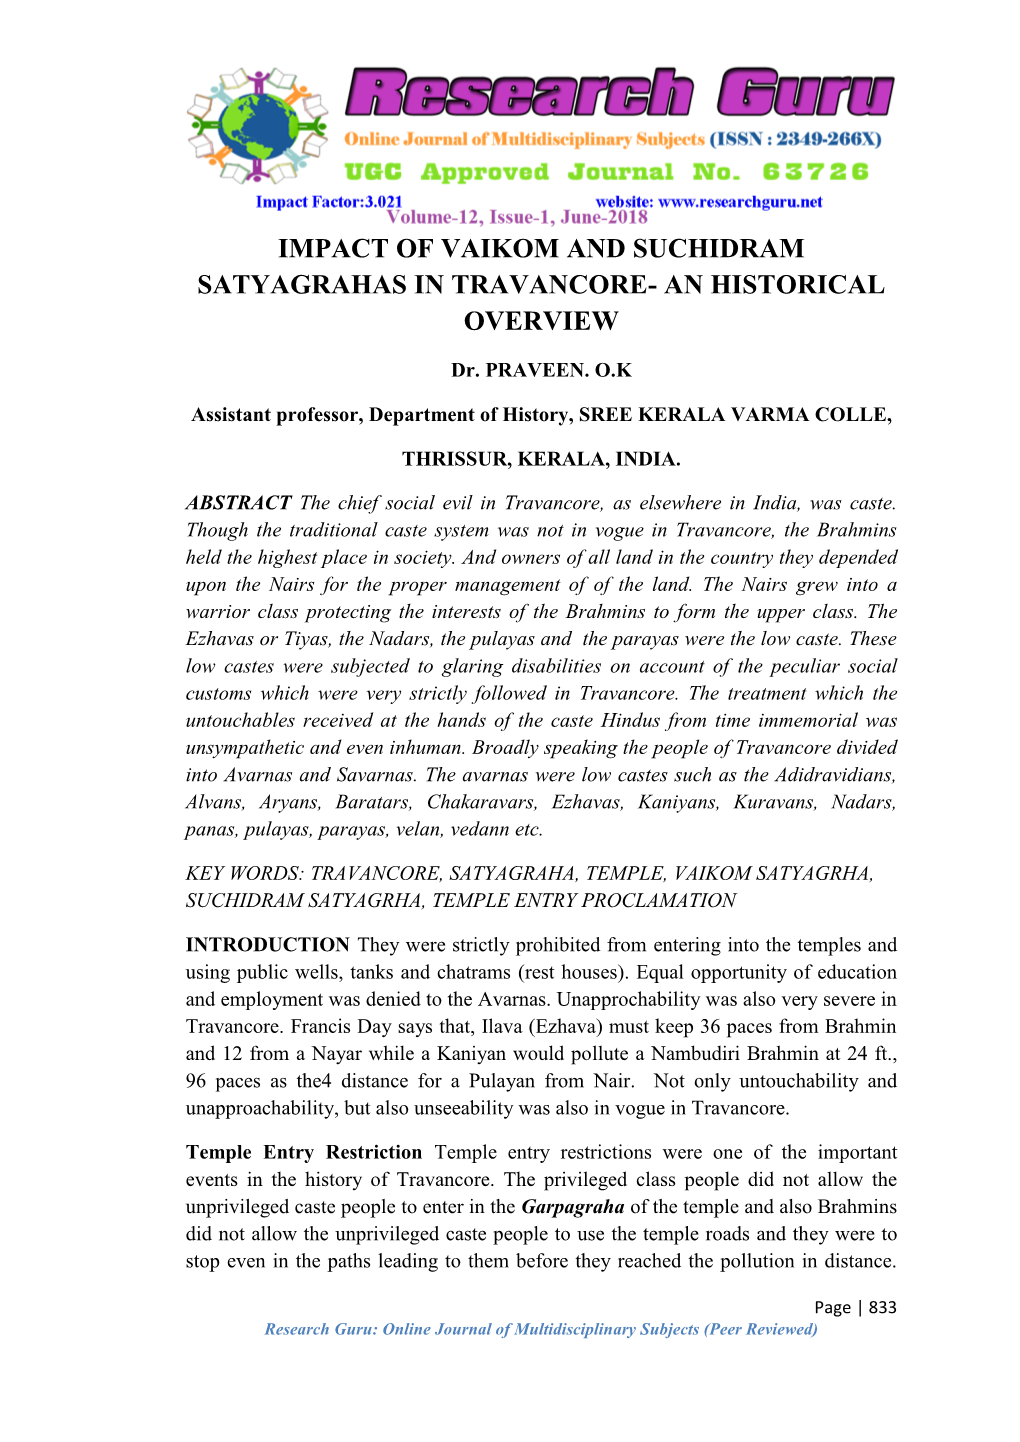 Impact of Vaikom and Suchidram Satyagrahas in Travancore- an Historical Overview